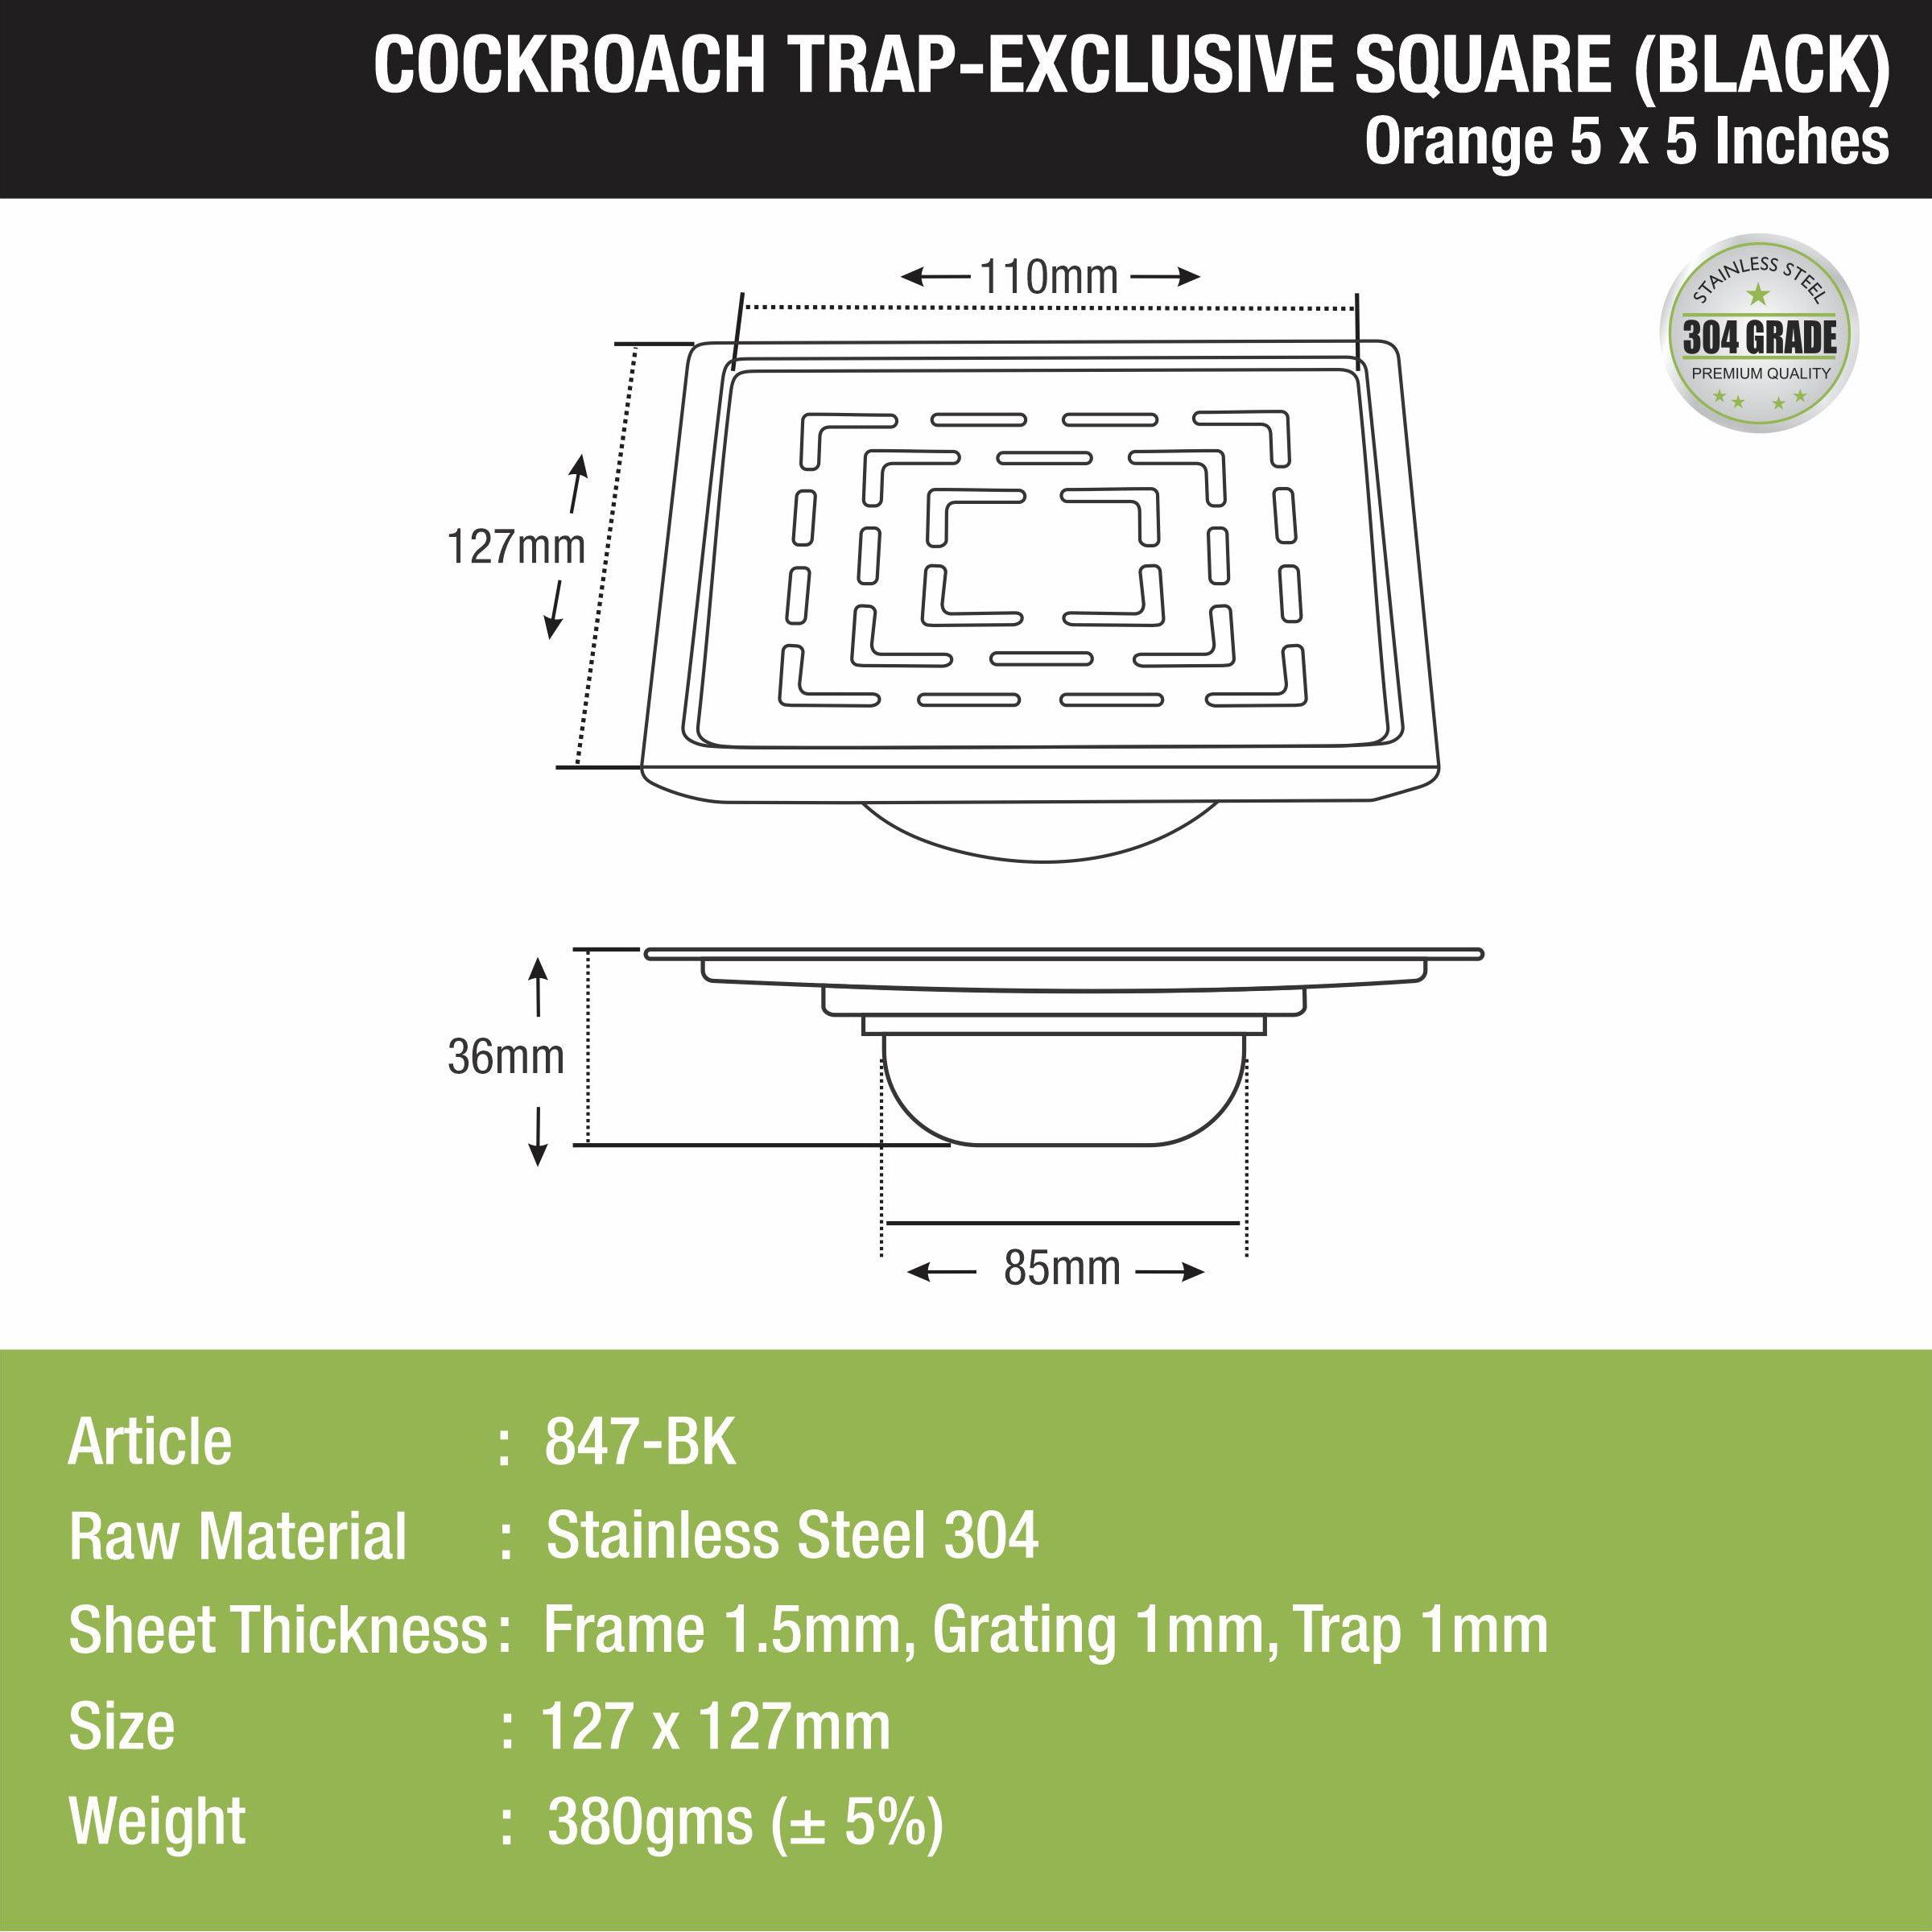 Orange Exclusive Square Floor Drain in Black PVD Coating (5 x 5 Inches) with Cockroach Trap size and measurement